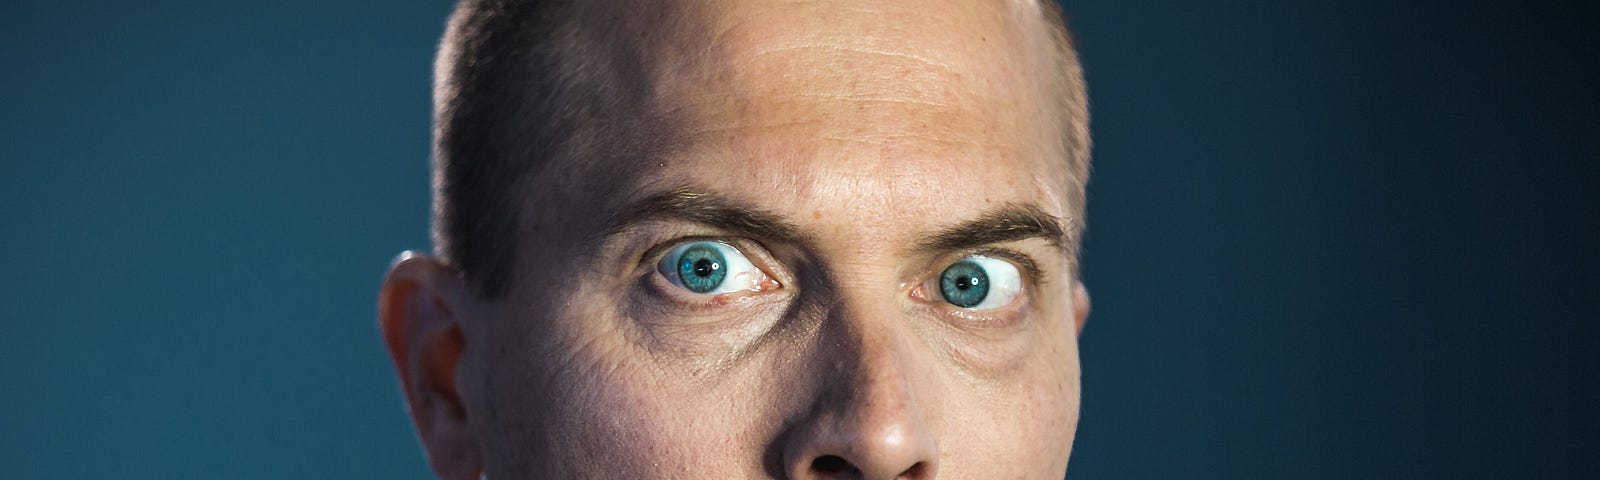 Close view of a scared expression on a man’s face.